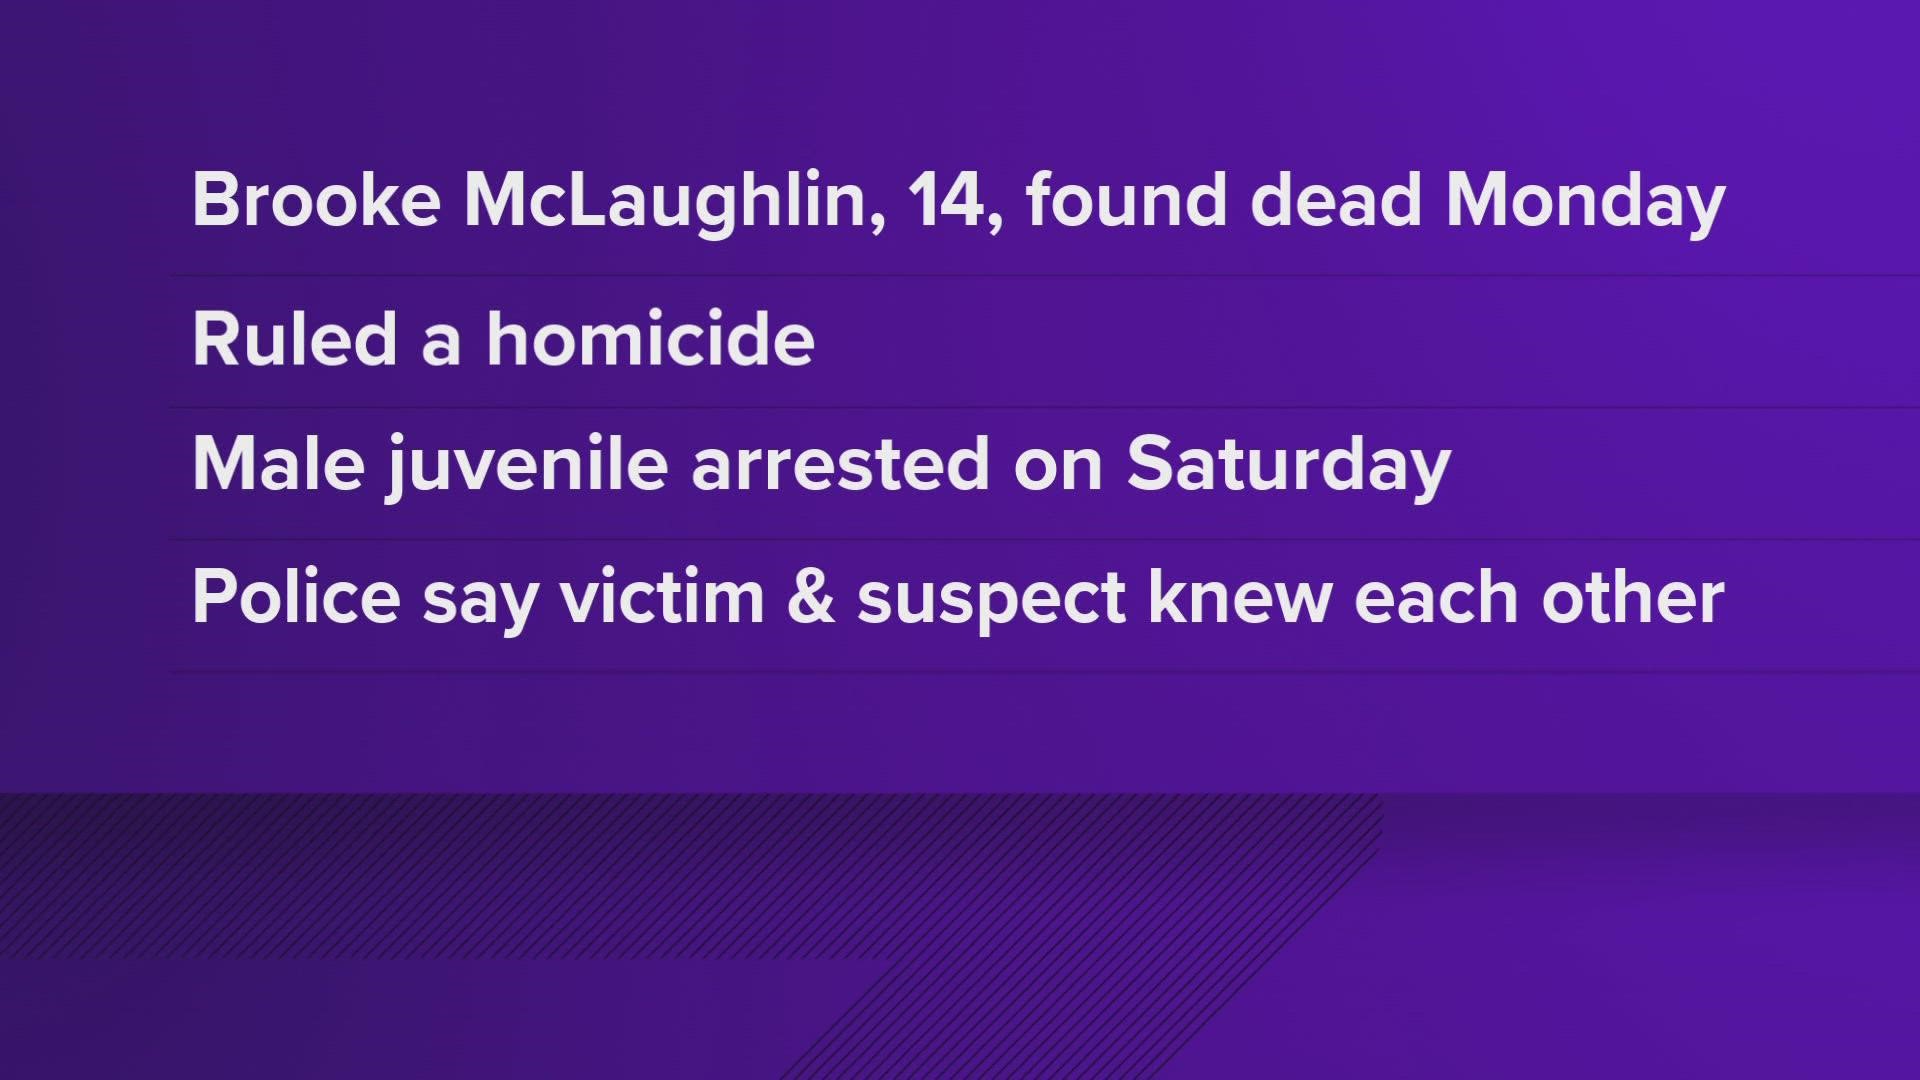 Maine's public information officer said a juvenile male has been arrested in connection with the murder of 14-year-old Brooke McLaughlin in Mount Vernon.